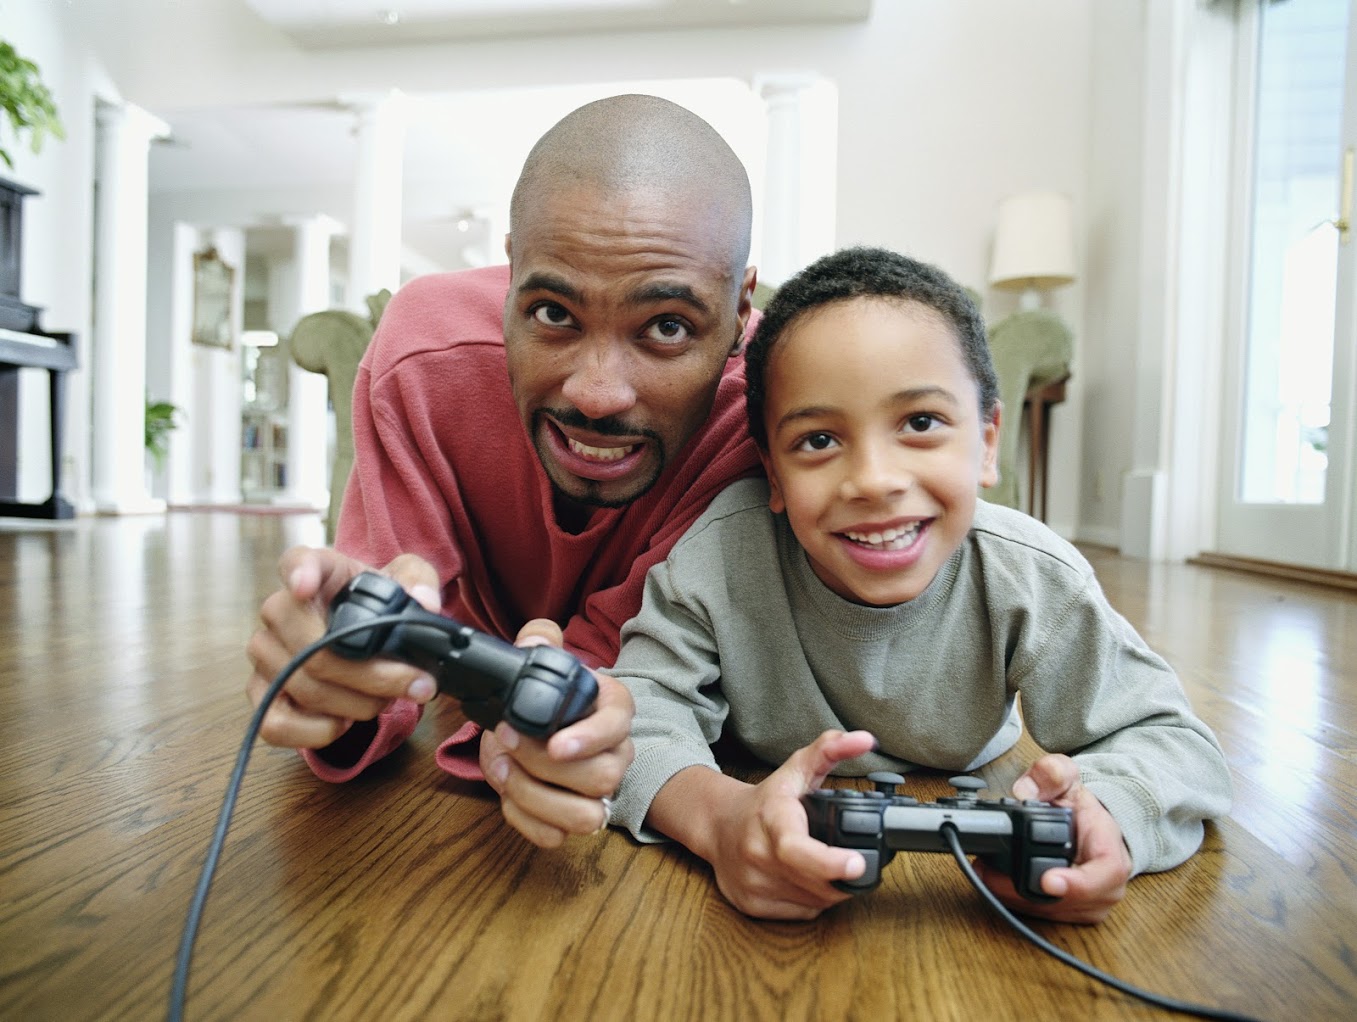 Man and boy playing video games while laying on the floor